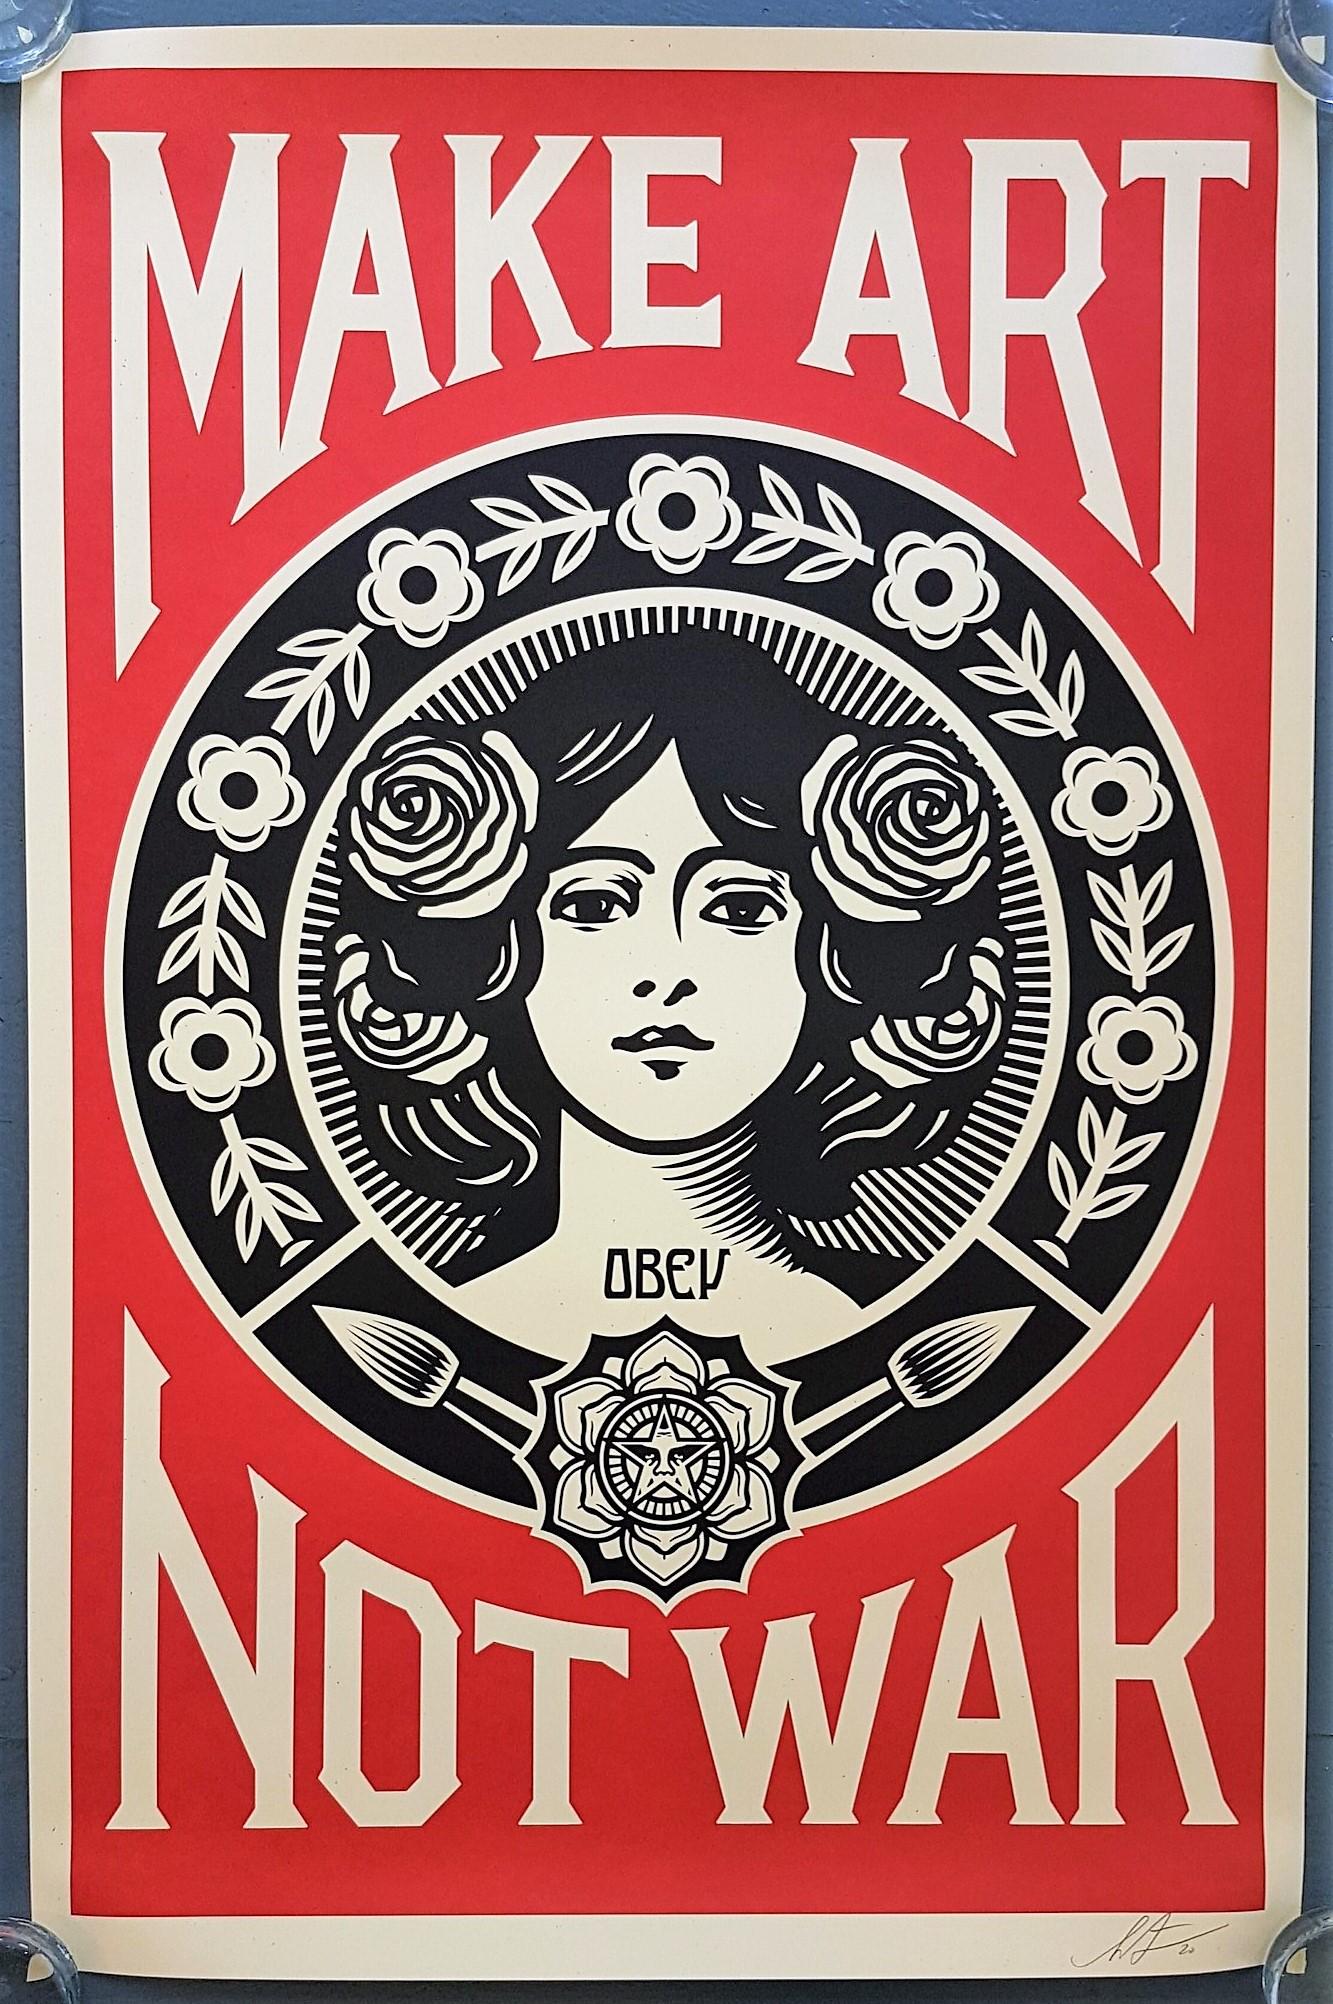 Shepard Fairey
Make Art Not War
Offset lithograph on paper
Year: 2021-2024
Signed and dated by hand
Size: 33.7 × 22.2 on 35.7 × 23.8 inches
COA provided

- WILL SHIP WITH UPS FULLY INSURED AND TRACEABLE

*could be shipped in a simple black or white